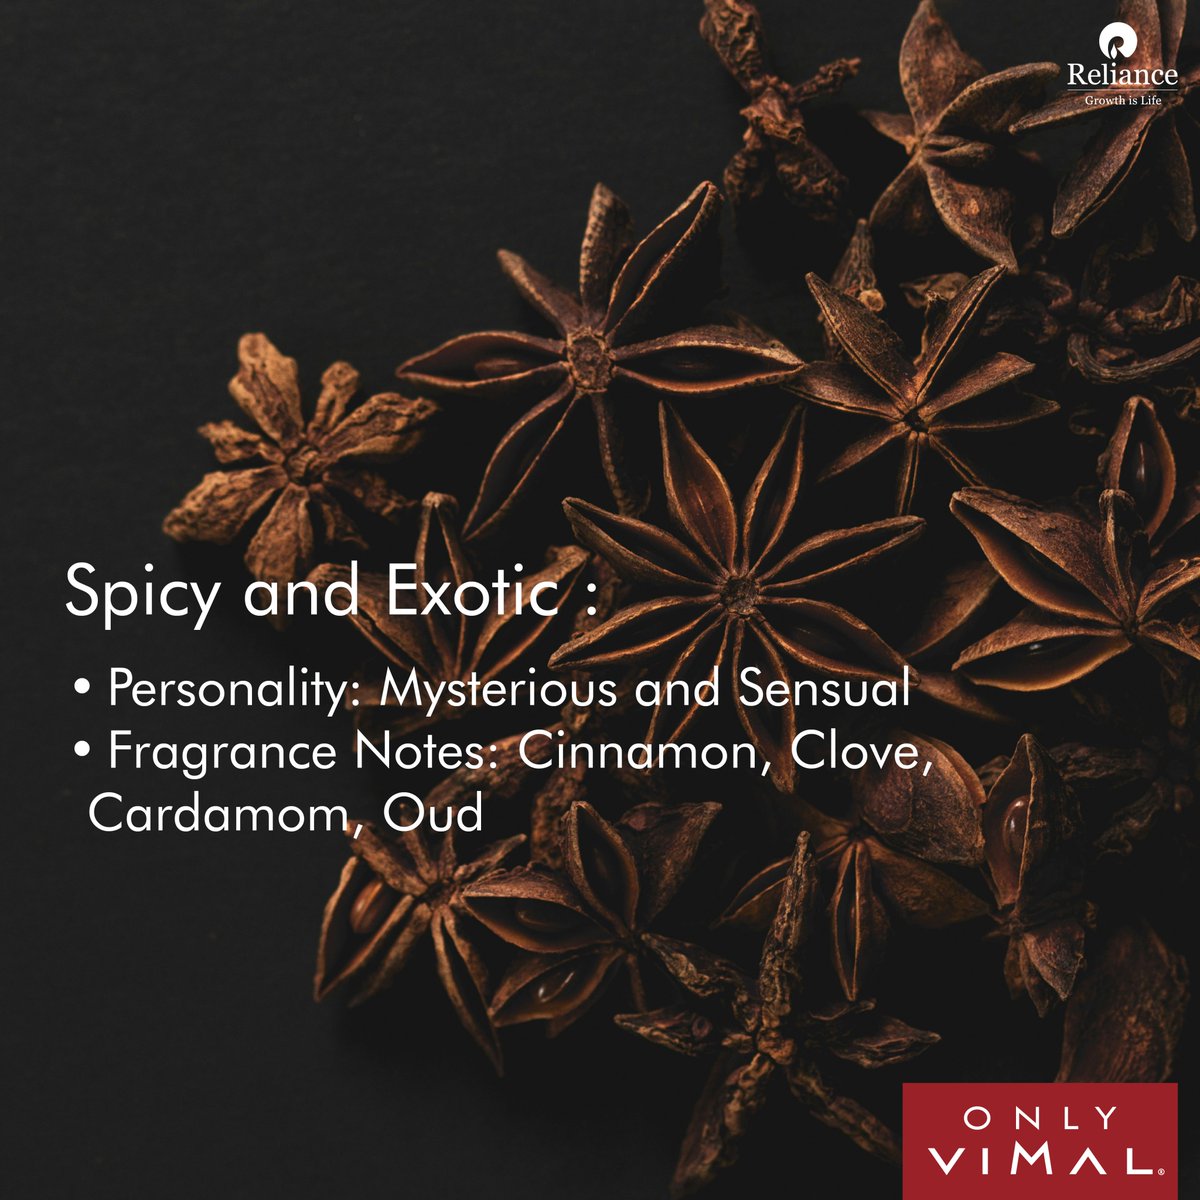 Unlocking the secrets of scent: how fragrance shapes who we are. Pt - 2 #FragranceAndPersonality #OnlyVimal #Reliance #RelianceIndustries #RelianceTextiles